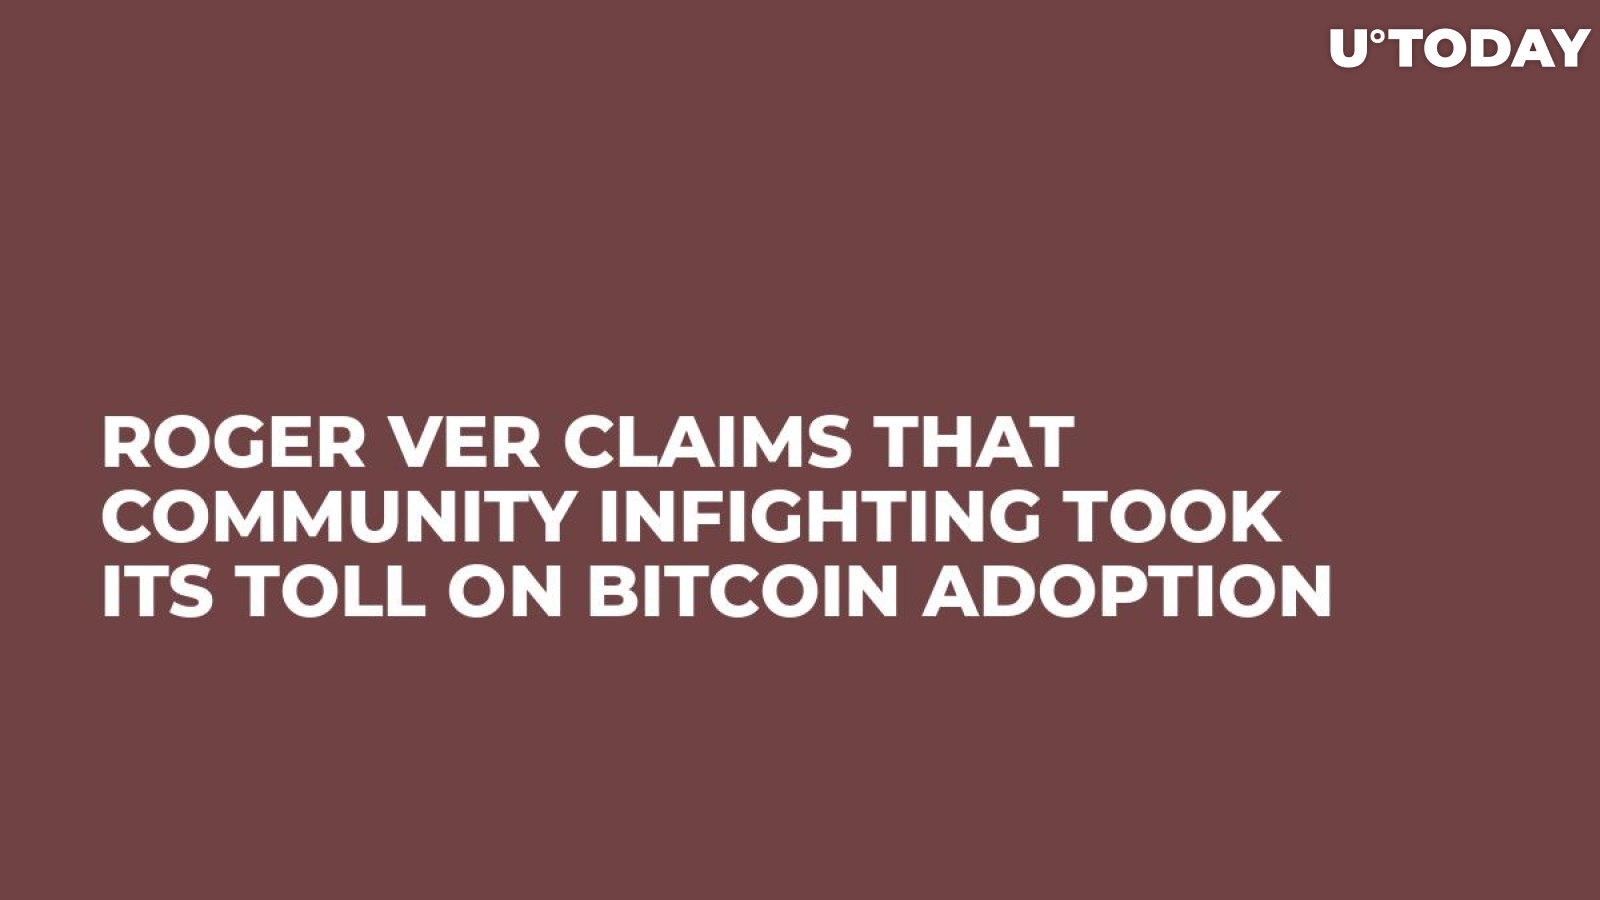 Roger Ver Claims That Community Infighting Took Its Toll on Bitcoin Adoption